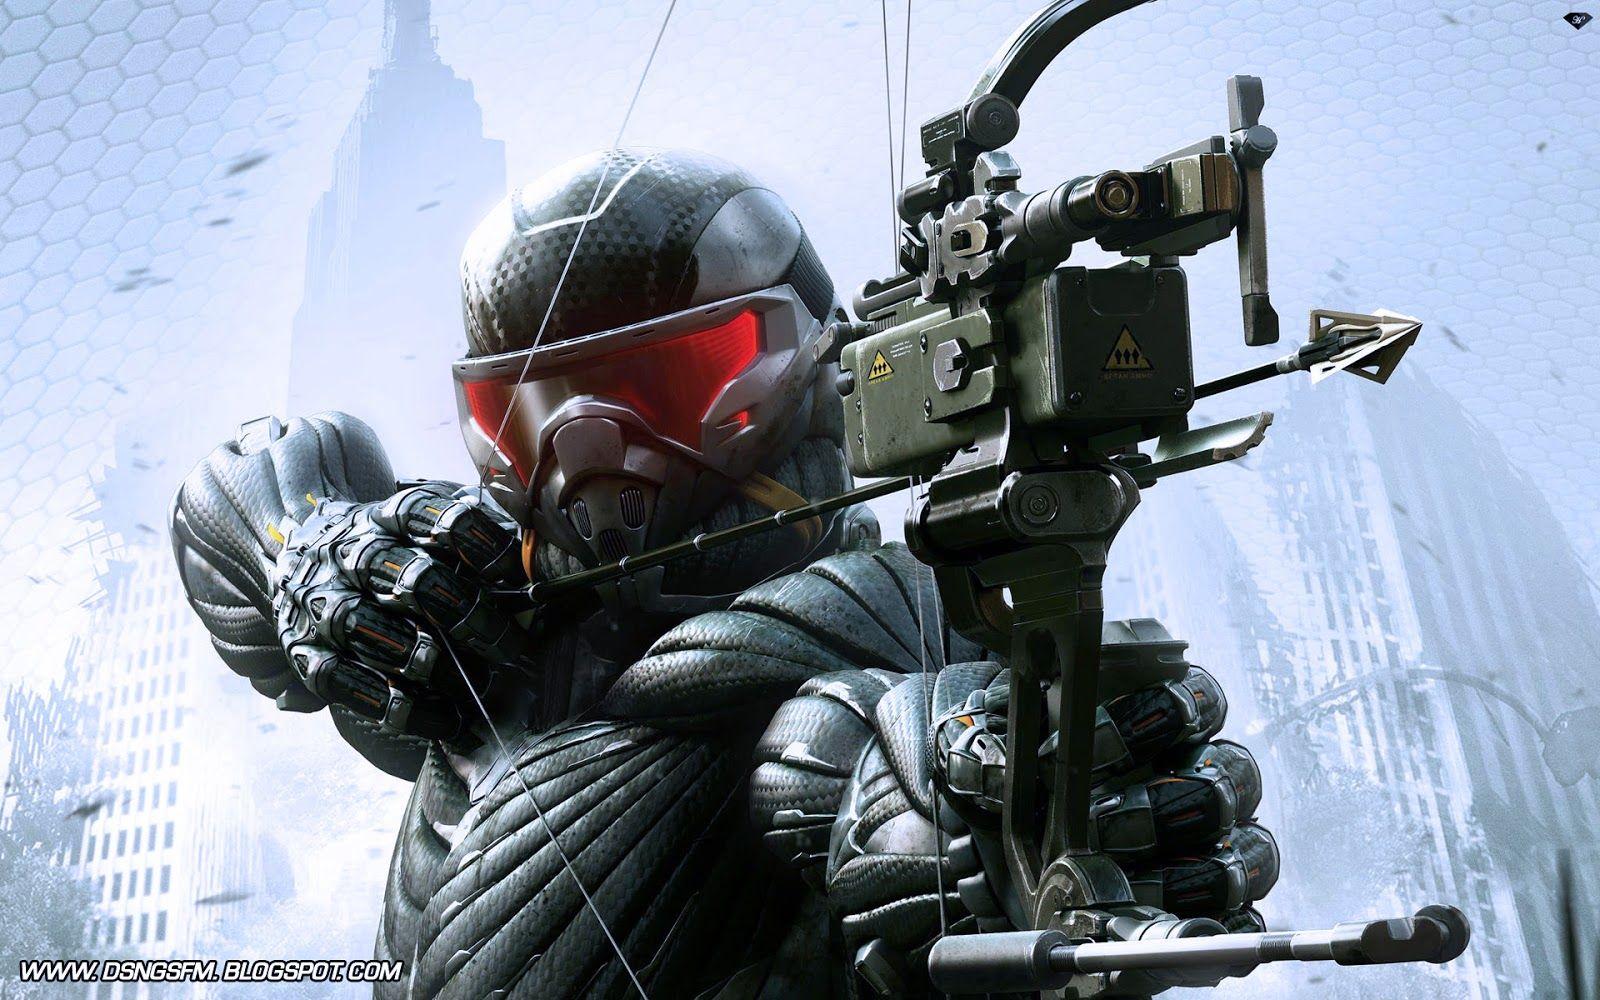 DSNG'S SCI FI MEGAVERSE: COOL SCI FI FUTURISTIC SOLDIERS WALLPAPERS